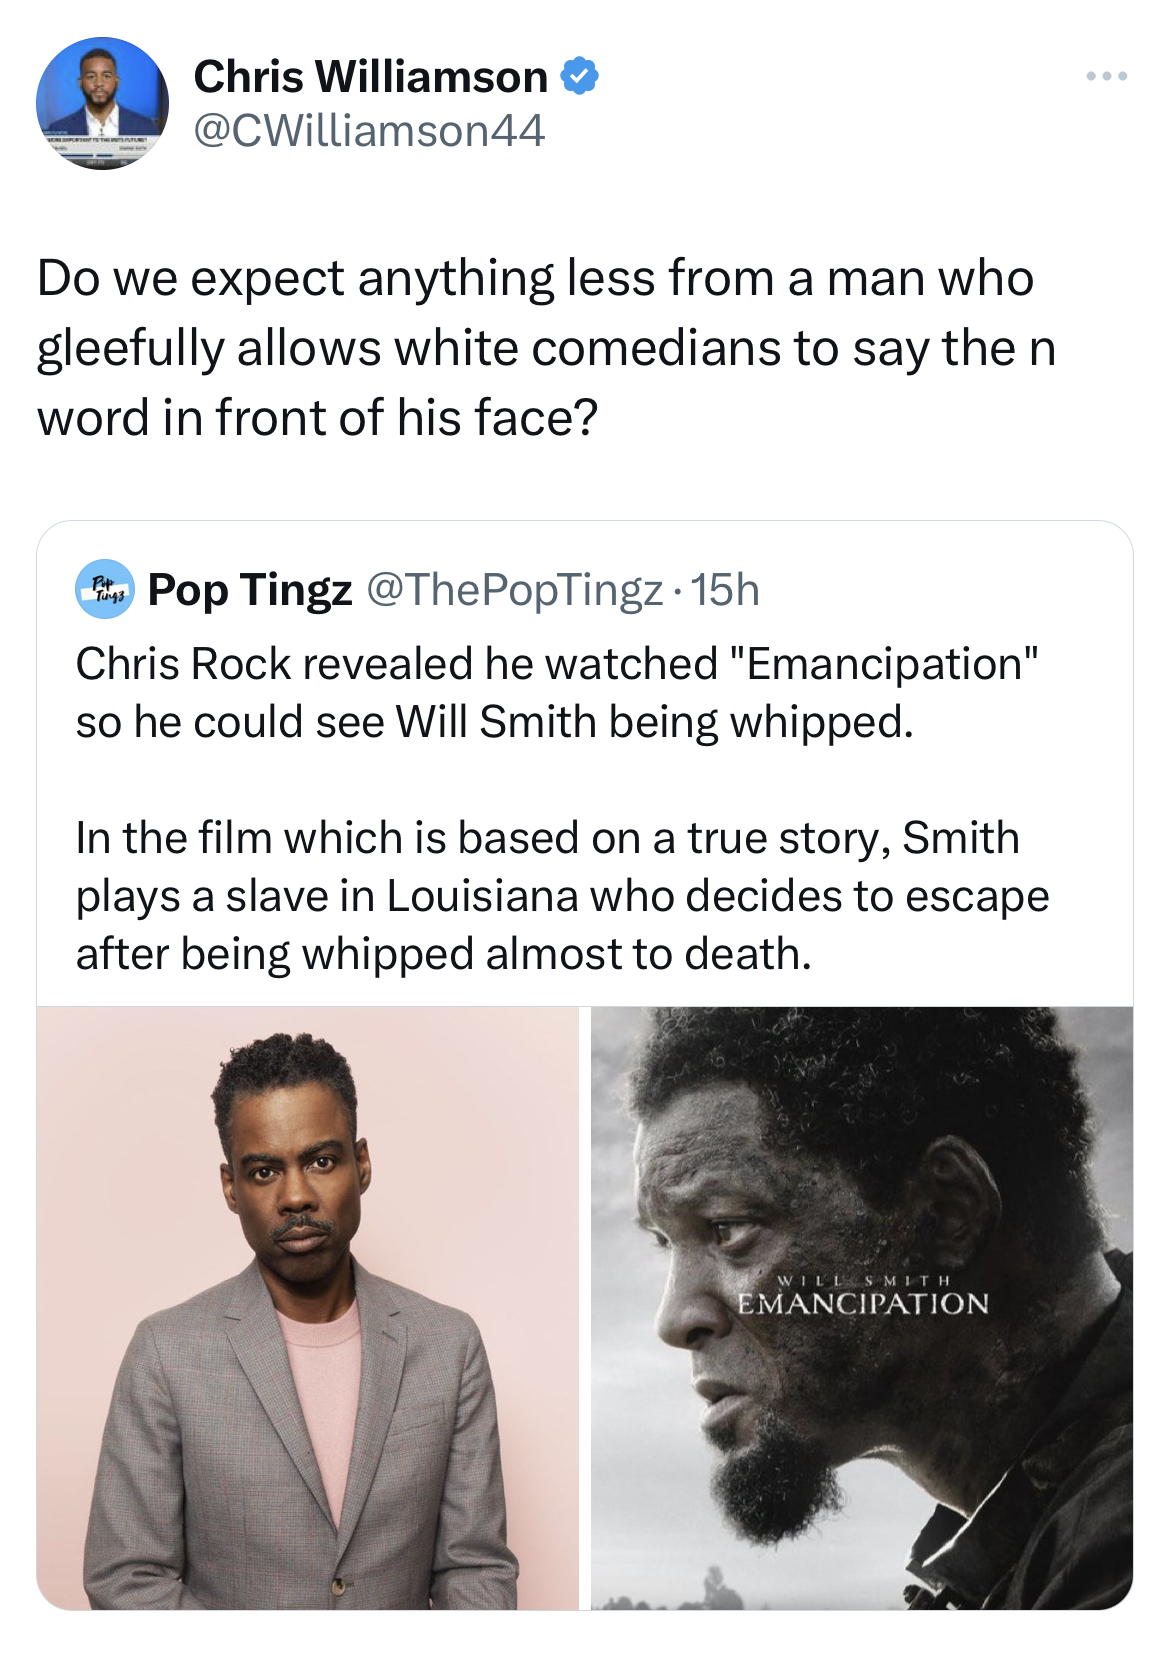 tweets roasting celebs - human - Chris Williamson Do we expect anything less from a man who gleefully allows white comedians to say the n word in front of his face? Pop Tingz 15h Chris Rock revealed he watched "Emancipation" so he could see Will Smith bei